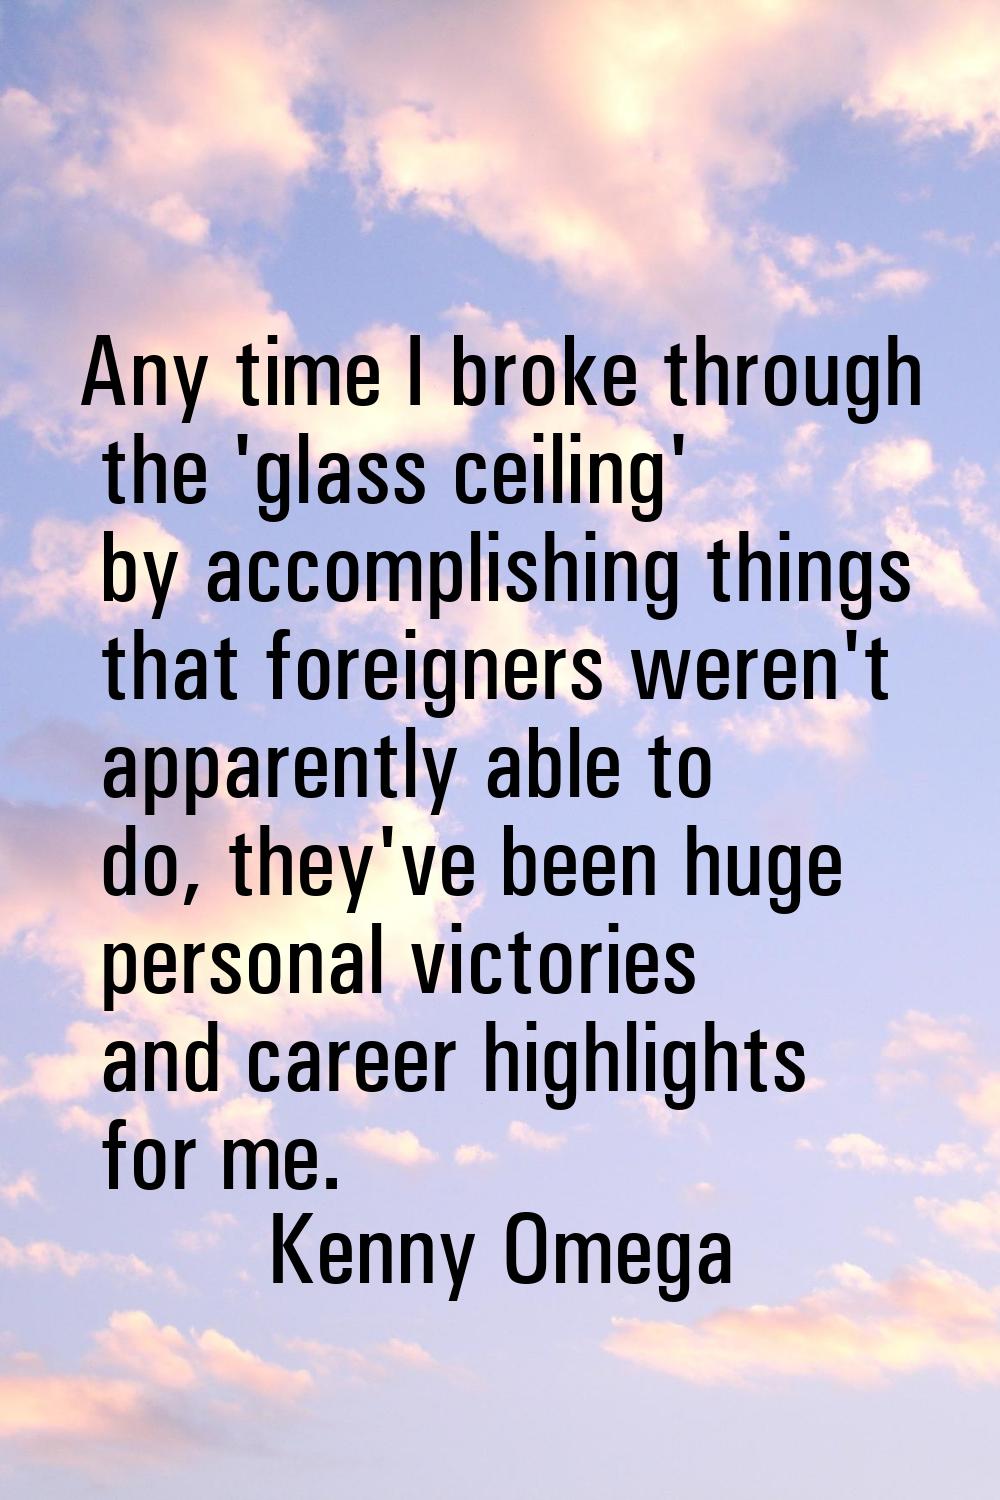 Any time I broke through the 'glass ceiling' by accomplishing things that foreigners weren't appare